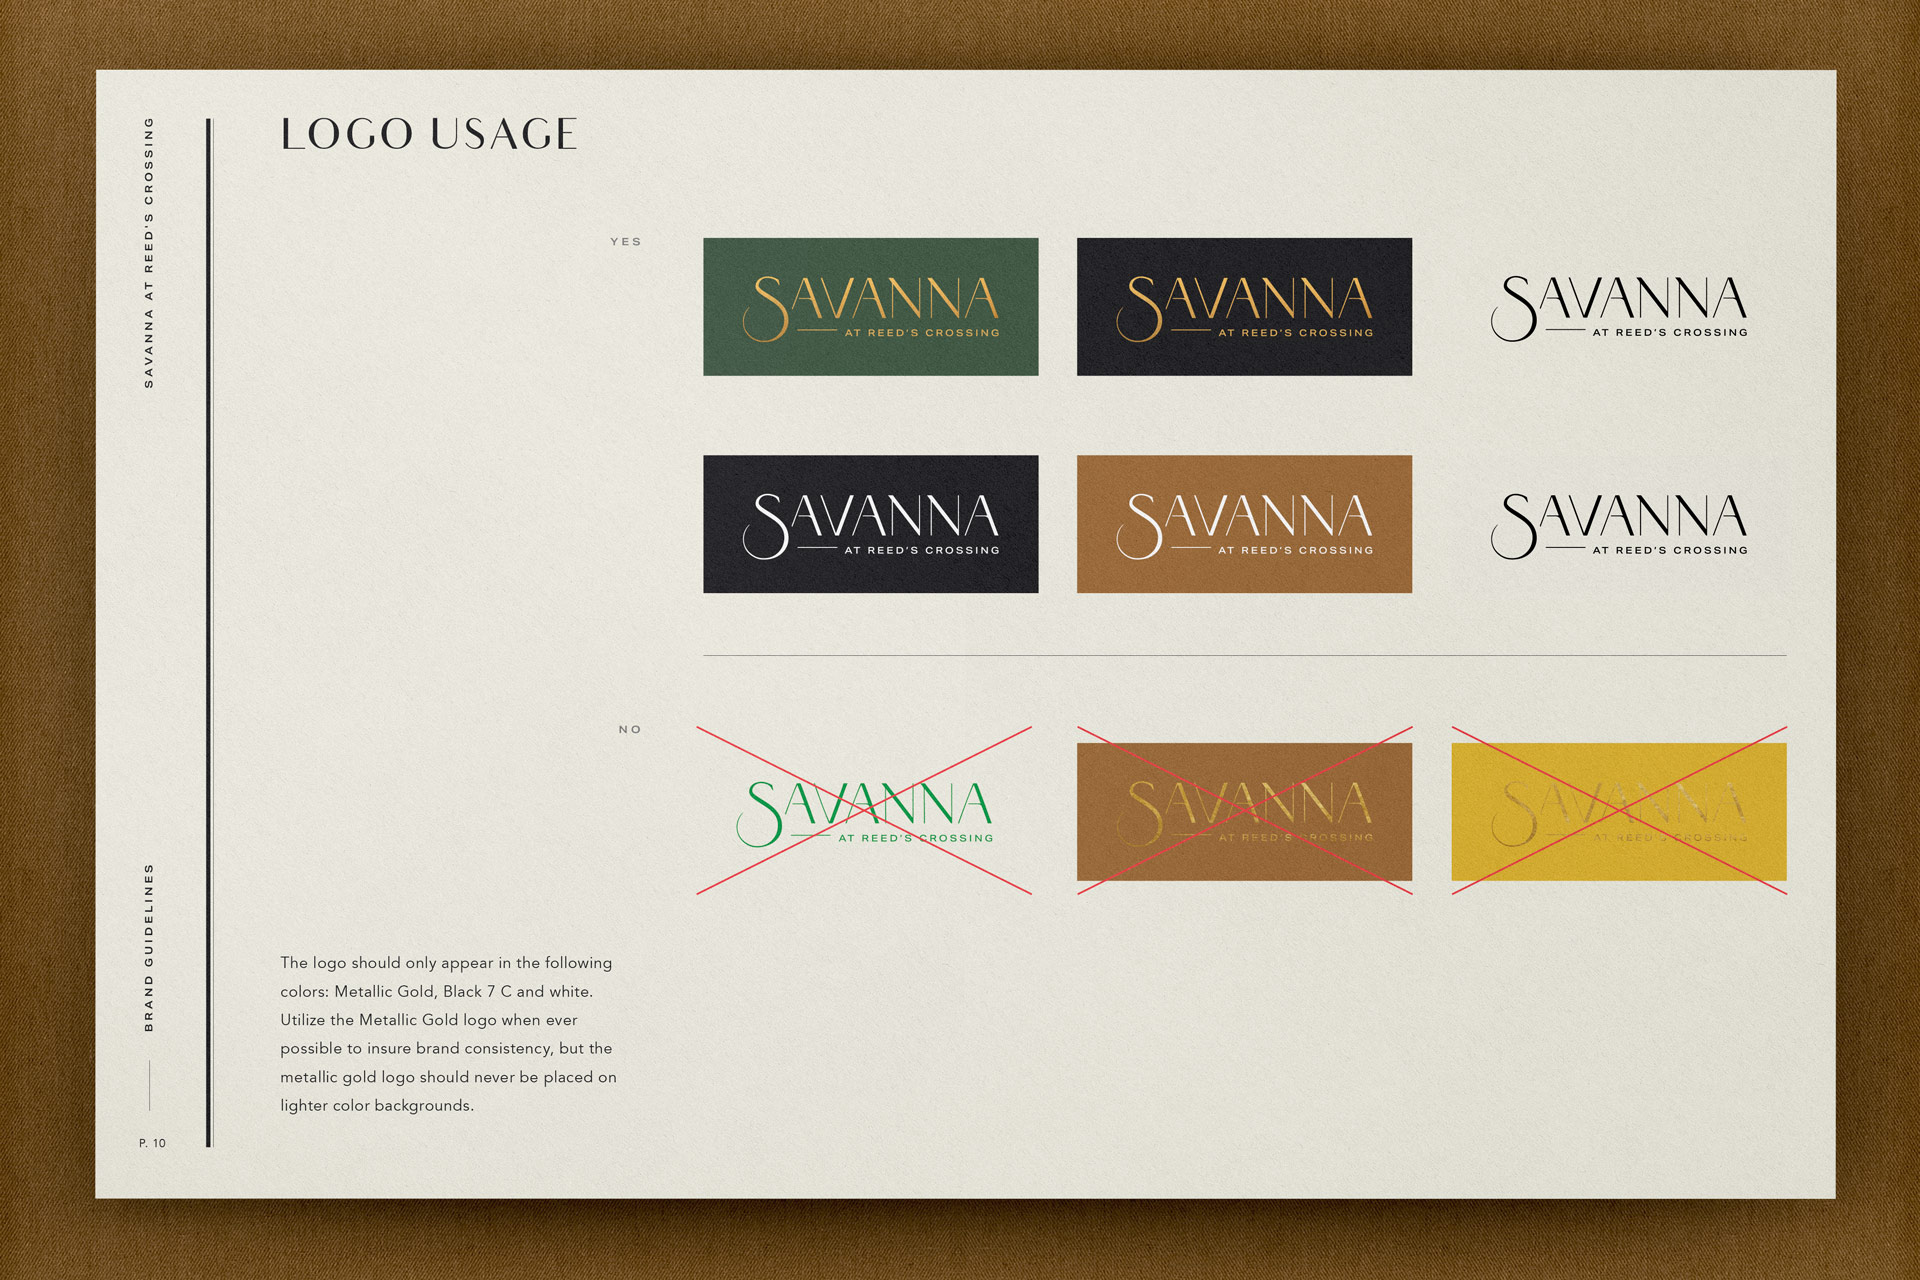 Savanna apartments at Reed's Crossing branding page showing logos